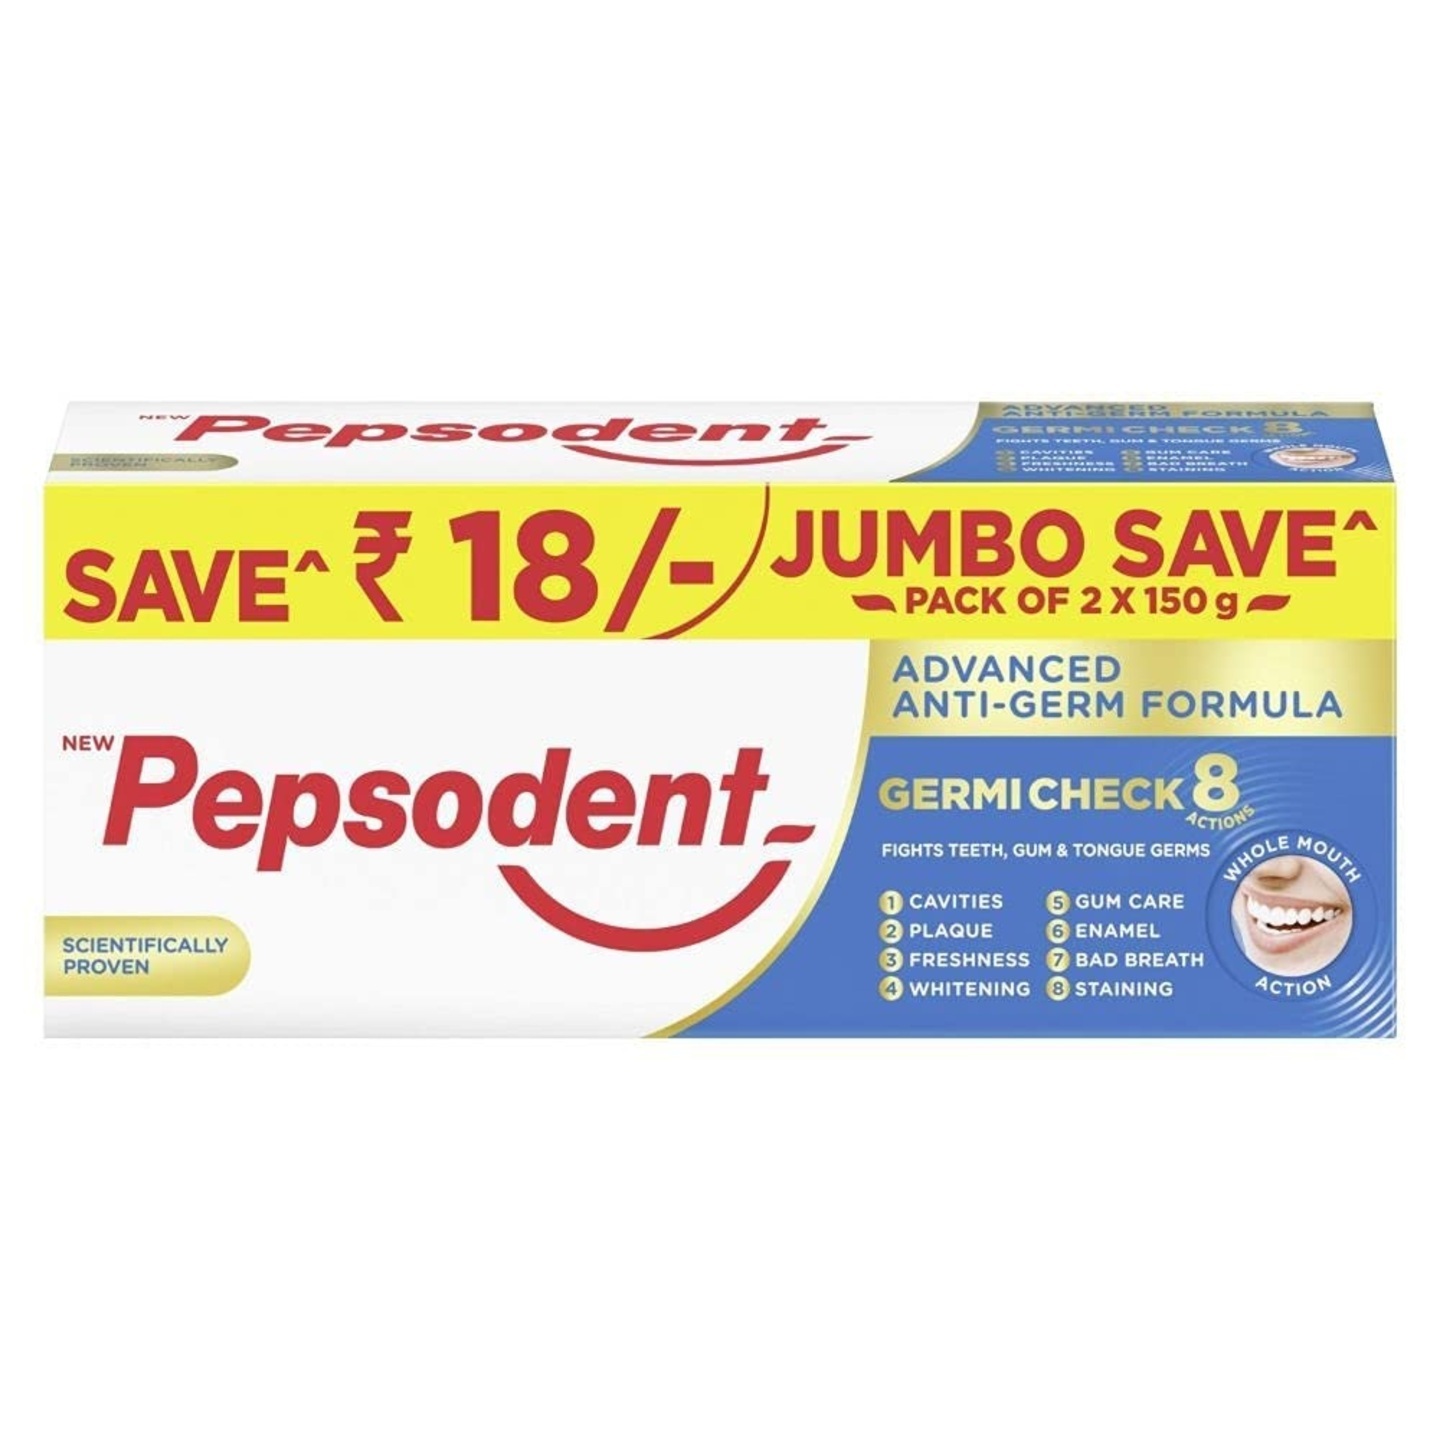 Pepsodent Germicheck Toothpaste 300g (150g x 2) - Jumbo Saver Pack